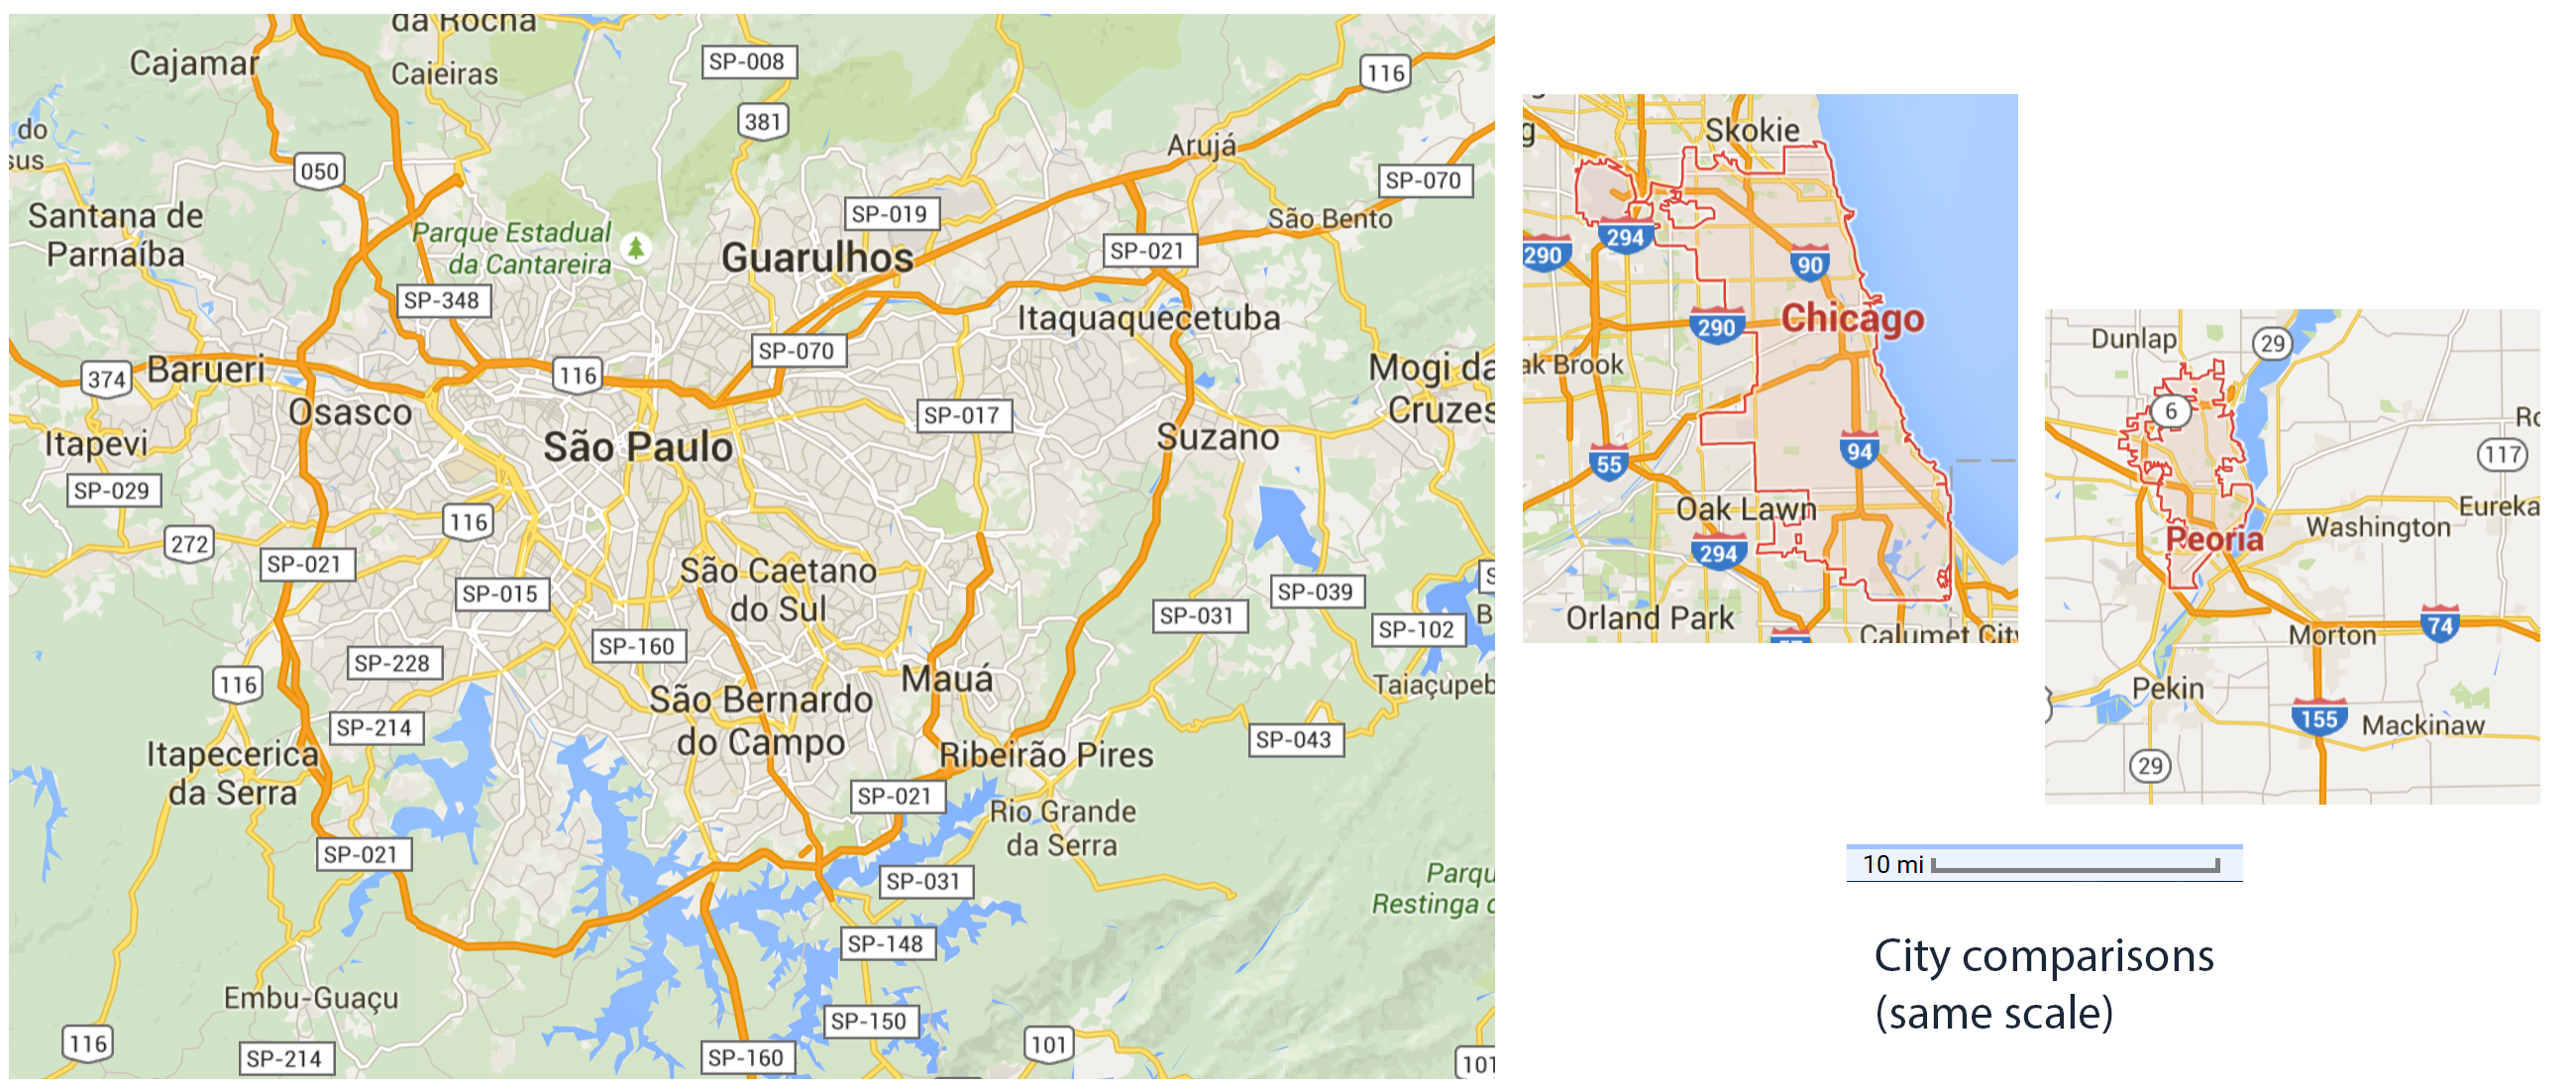 Sao Paulo, Chicago and Peoria at same scale